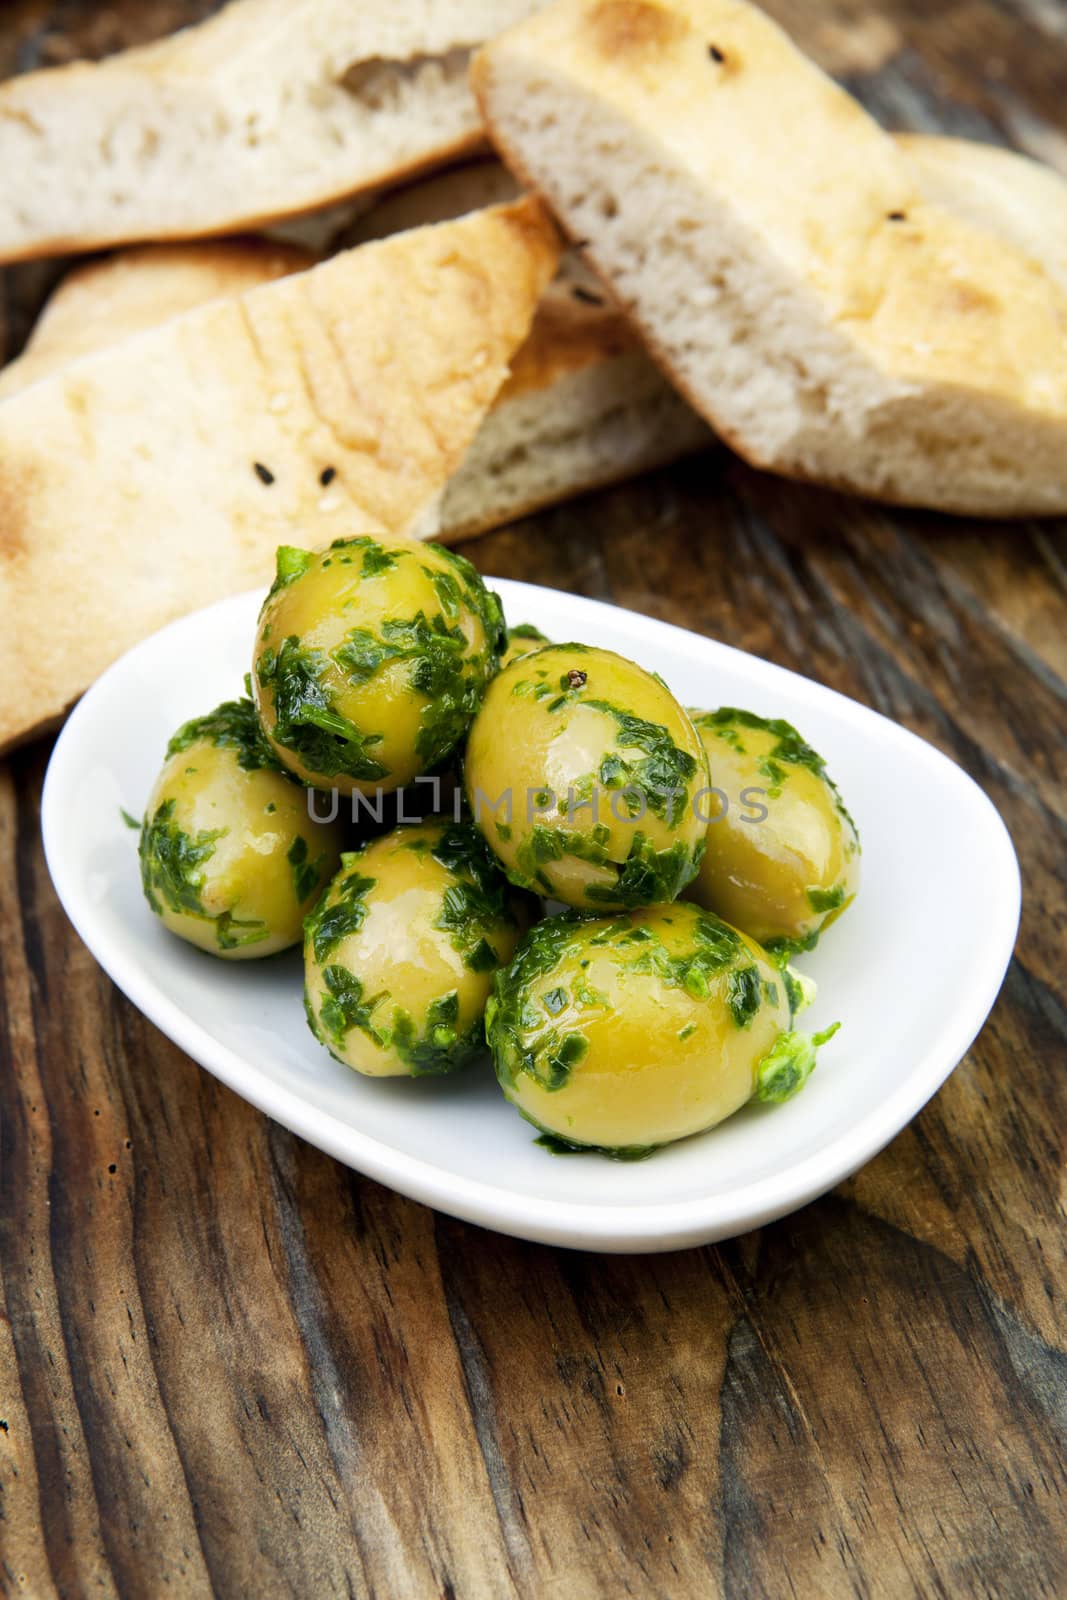 green olives with fresh bread and herbs on wooden background